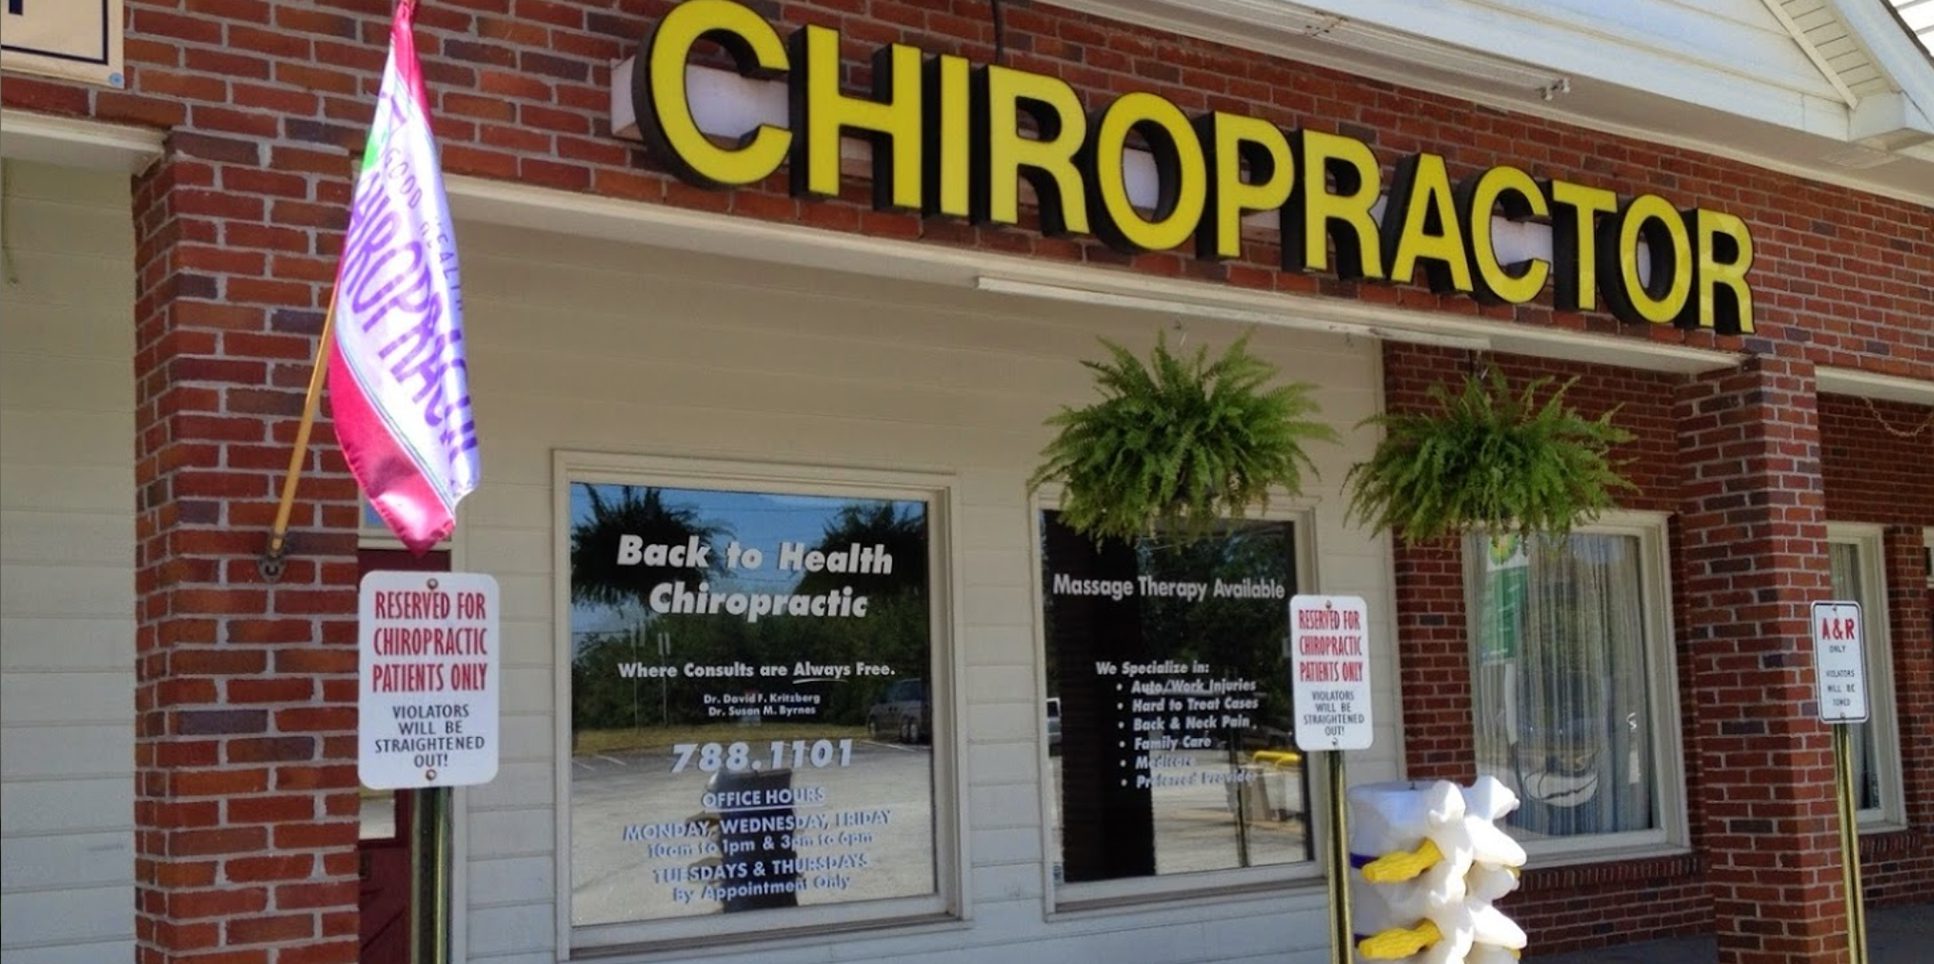 Back to Health Chiropractor Storefront